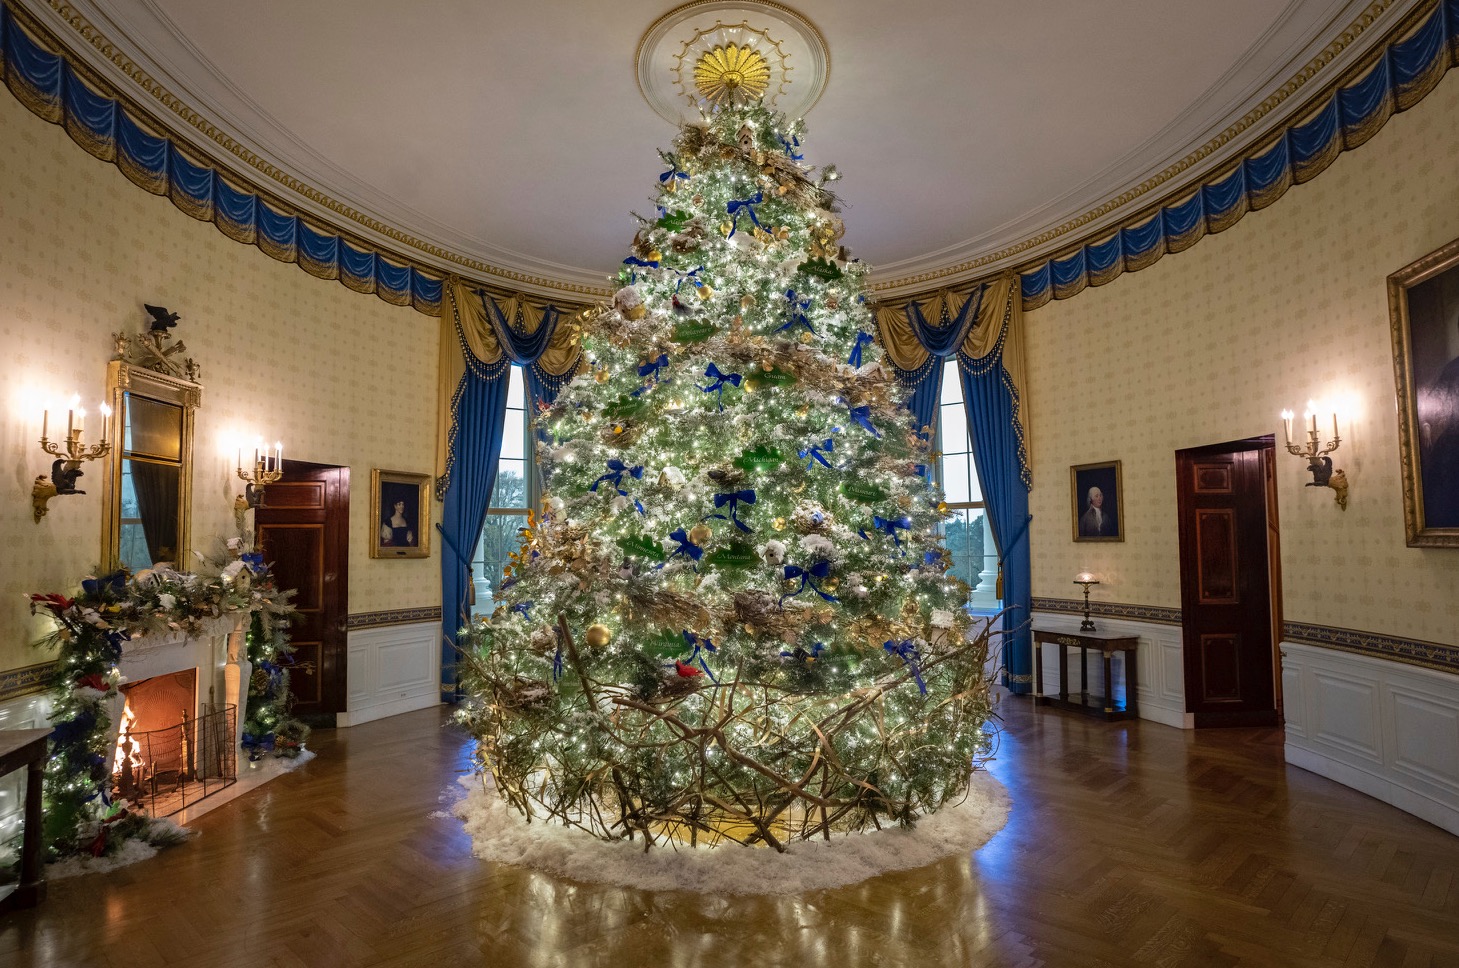 White House decorated in 'We the People' theme for holidays